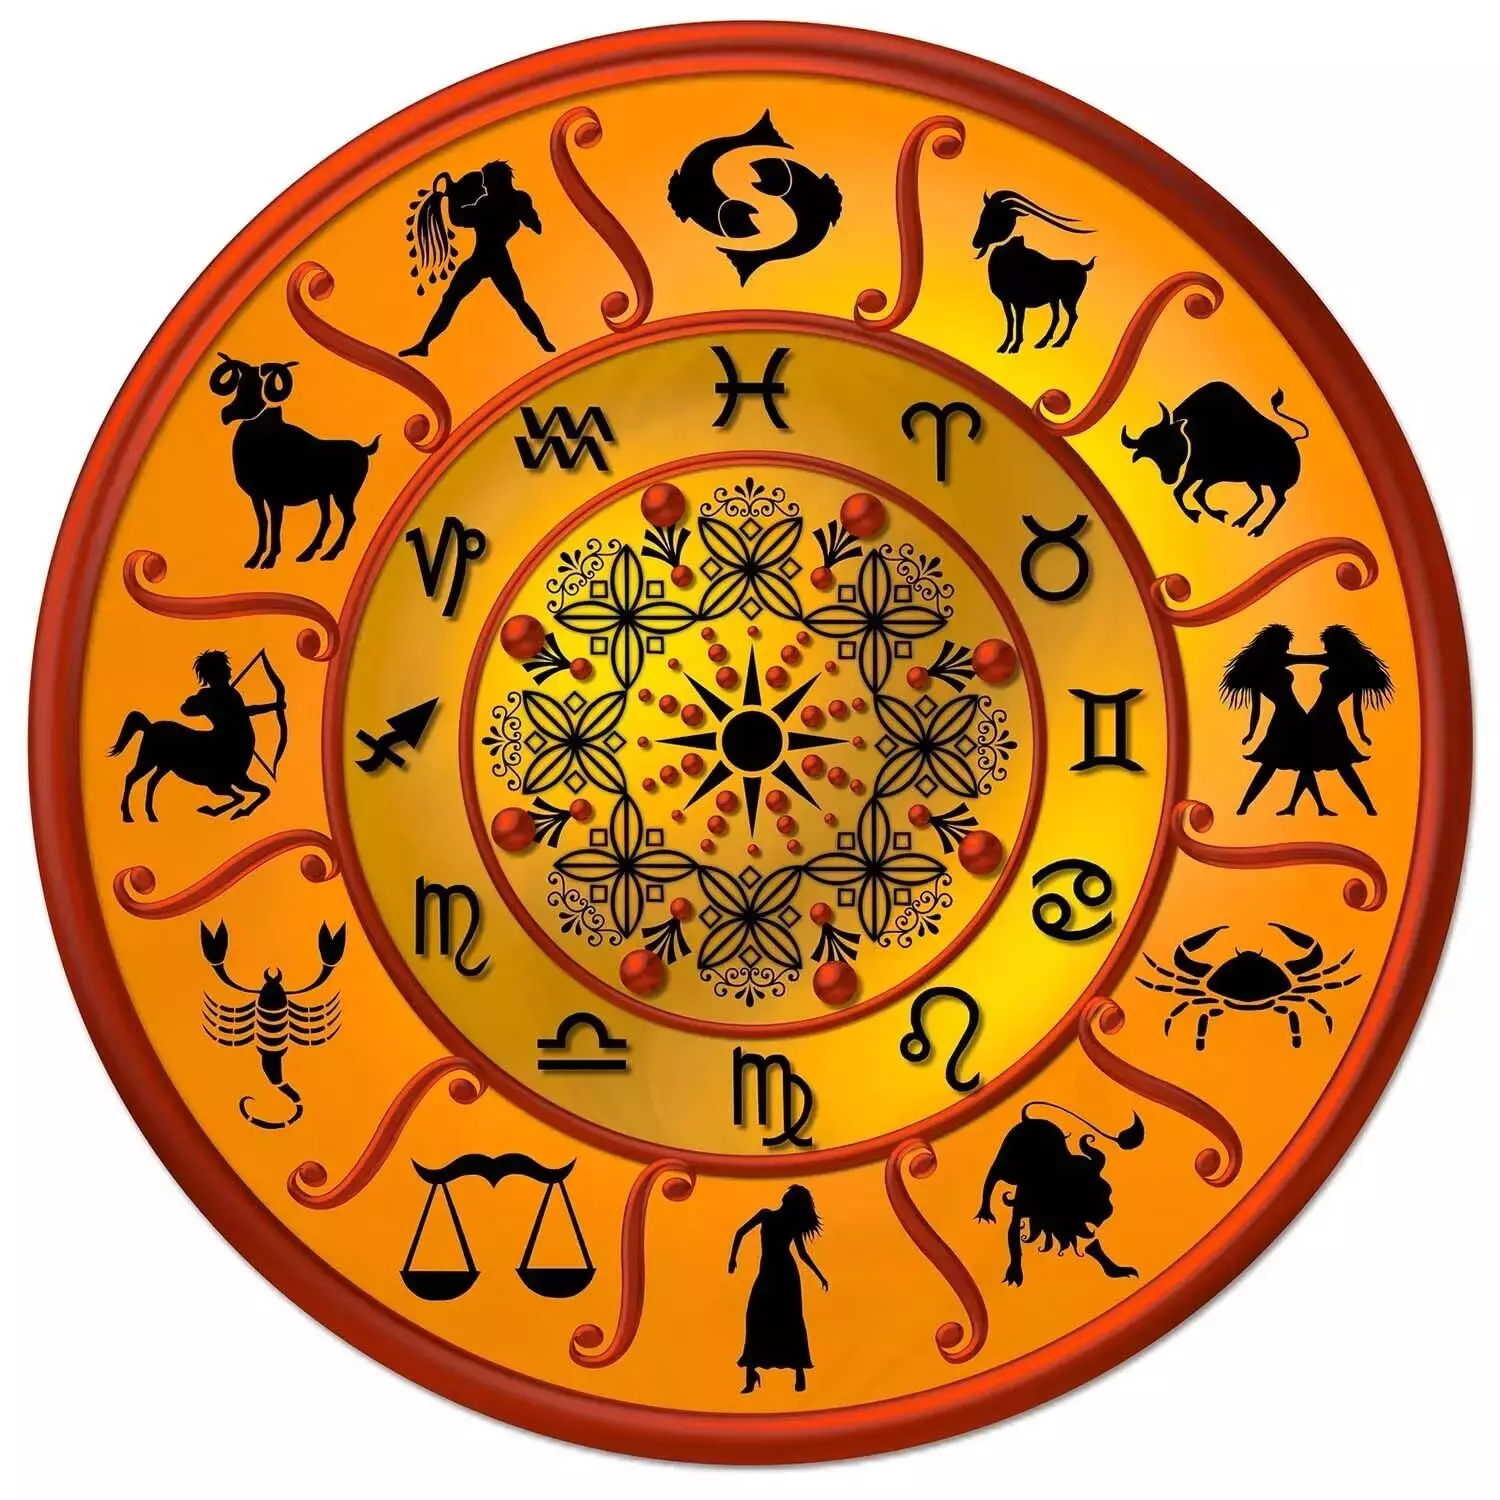 27 September  – Know your todays horoscope